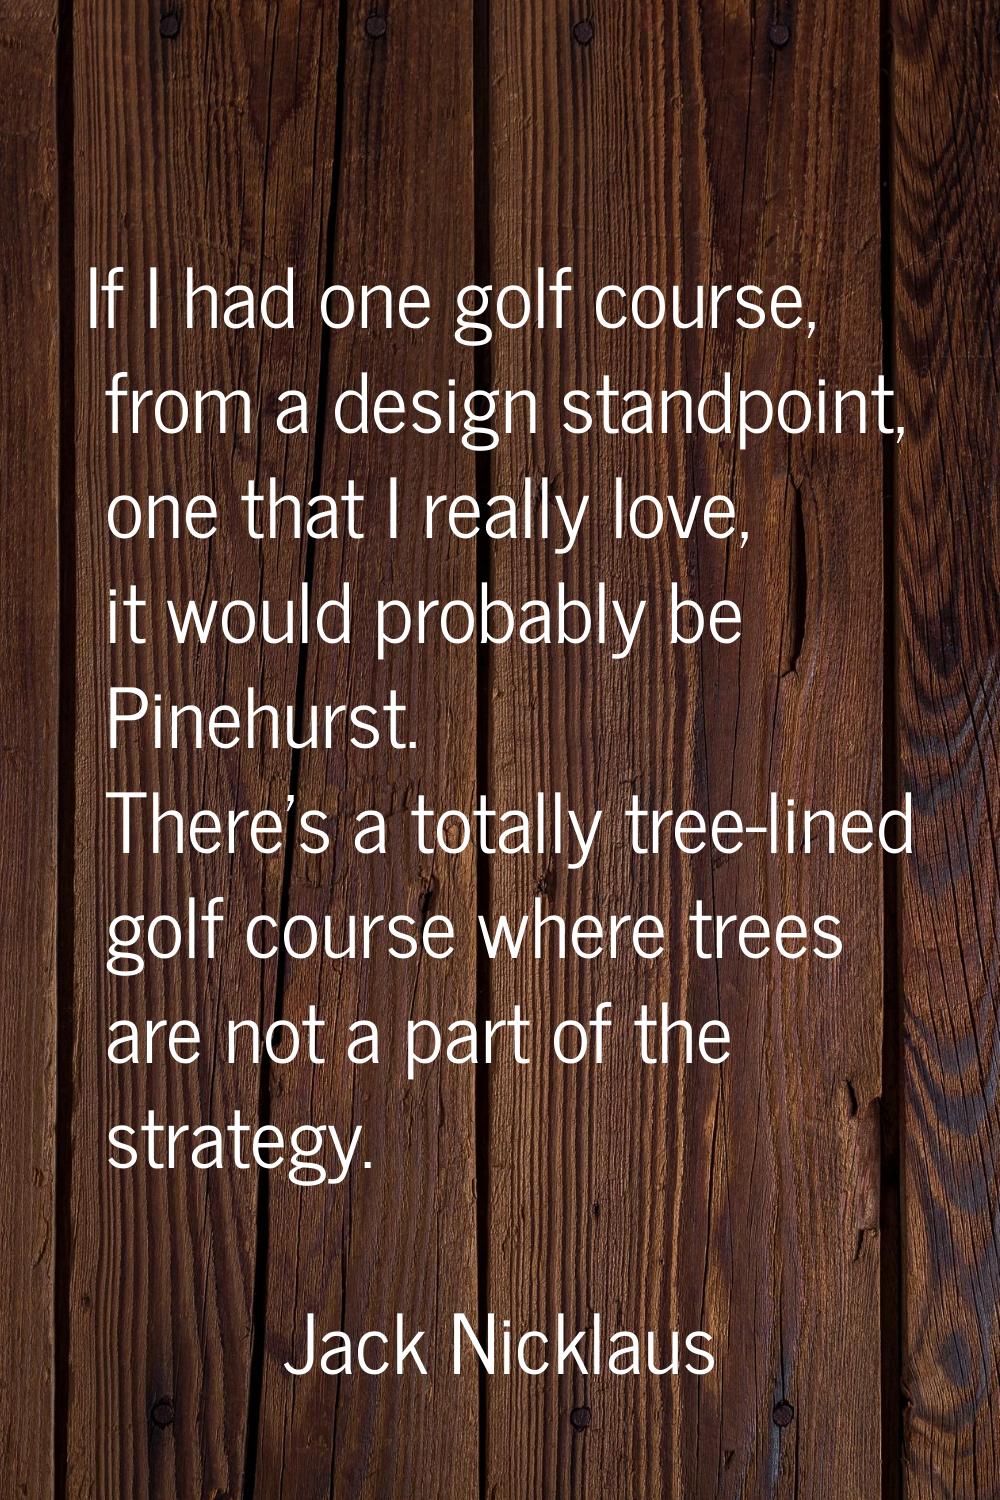 If I had one golf course, from a design standpoint, one that I really love, it would probably be Pi